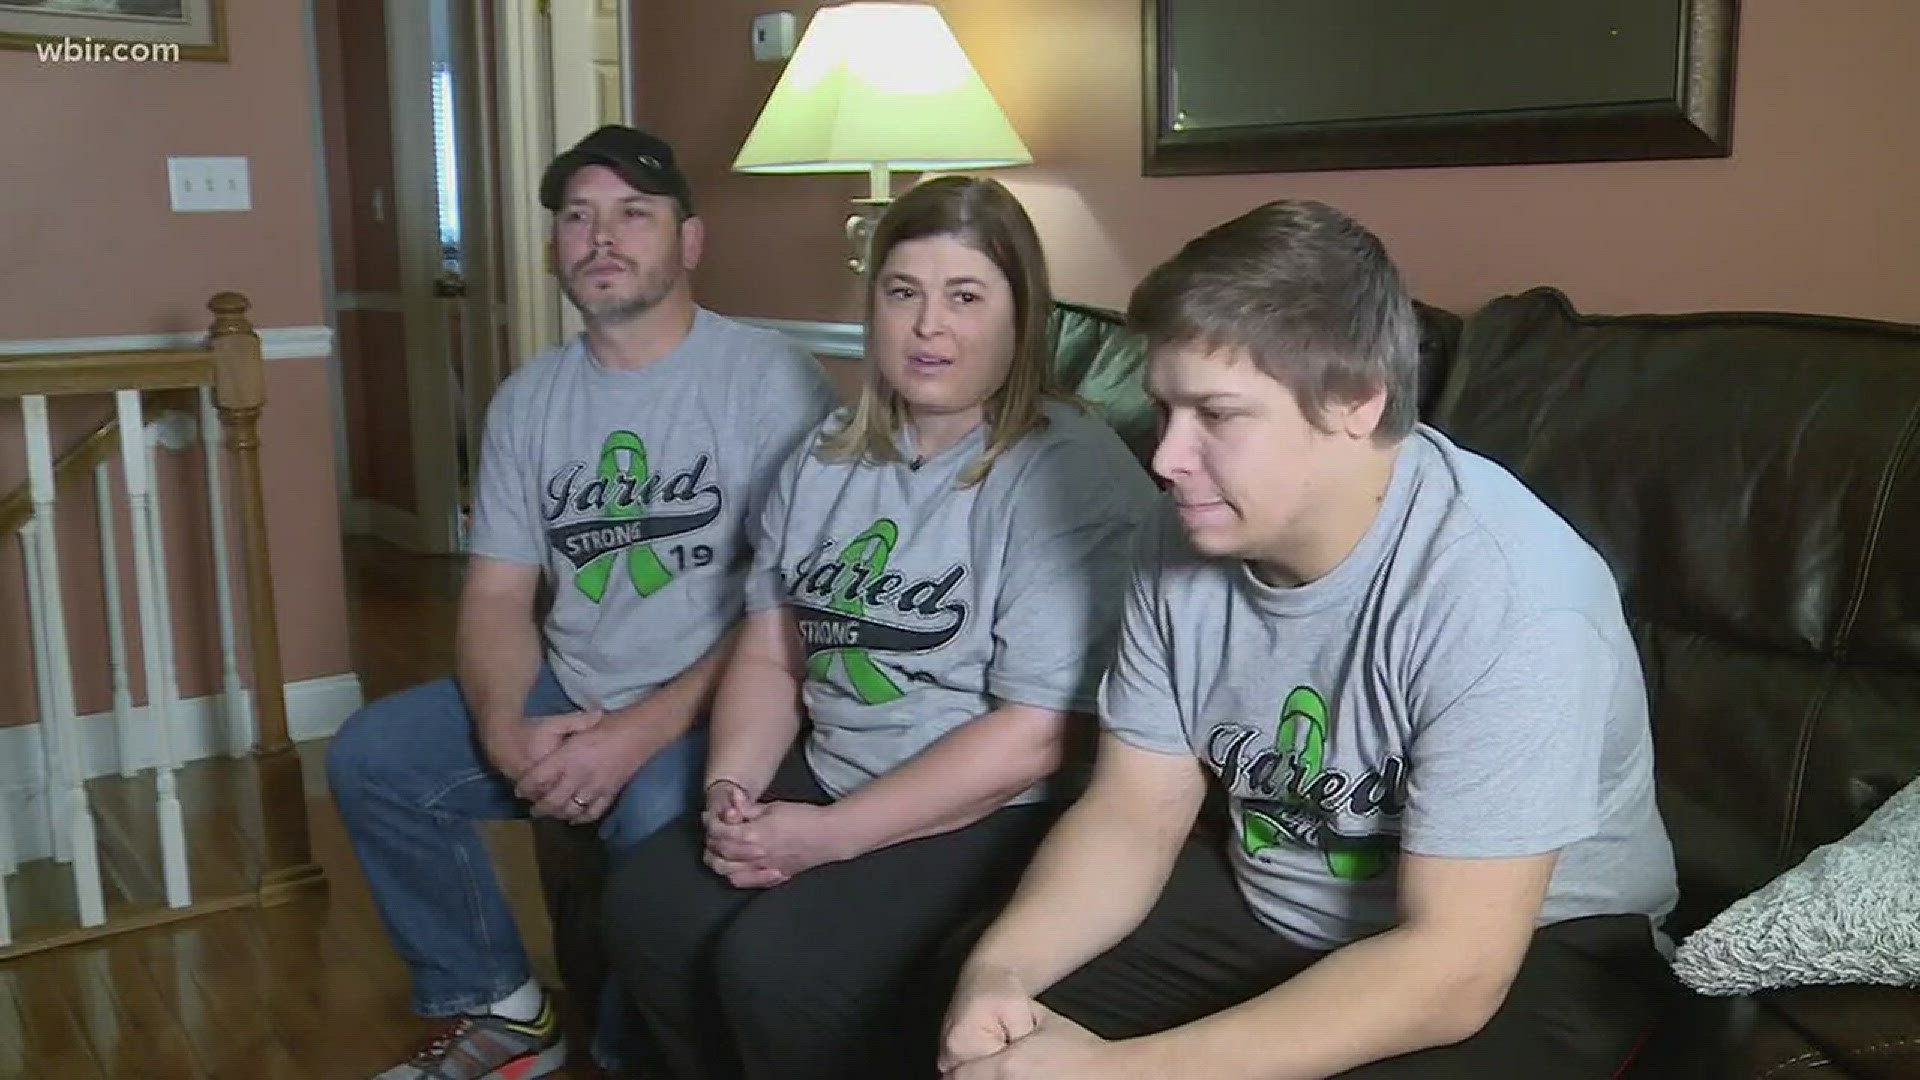 Jan. 17, 2018: A Morristown father is donating a kidney to his 19-year-old son, who has a rare kidney disease.